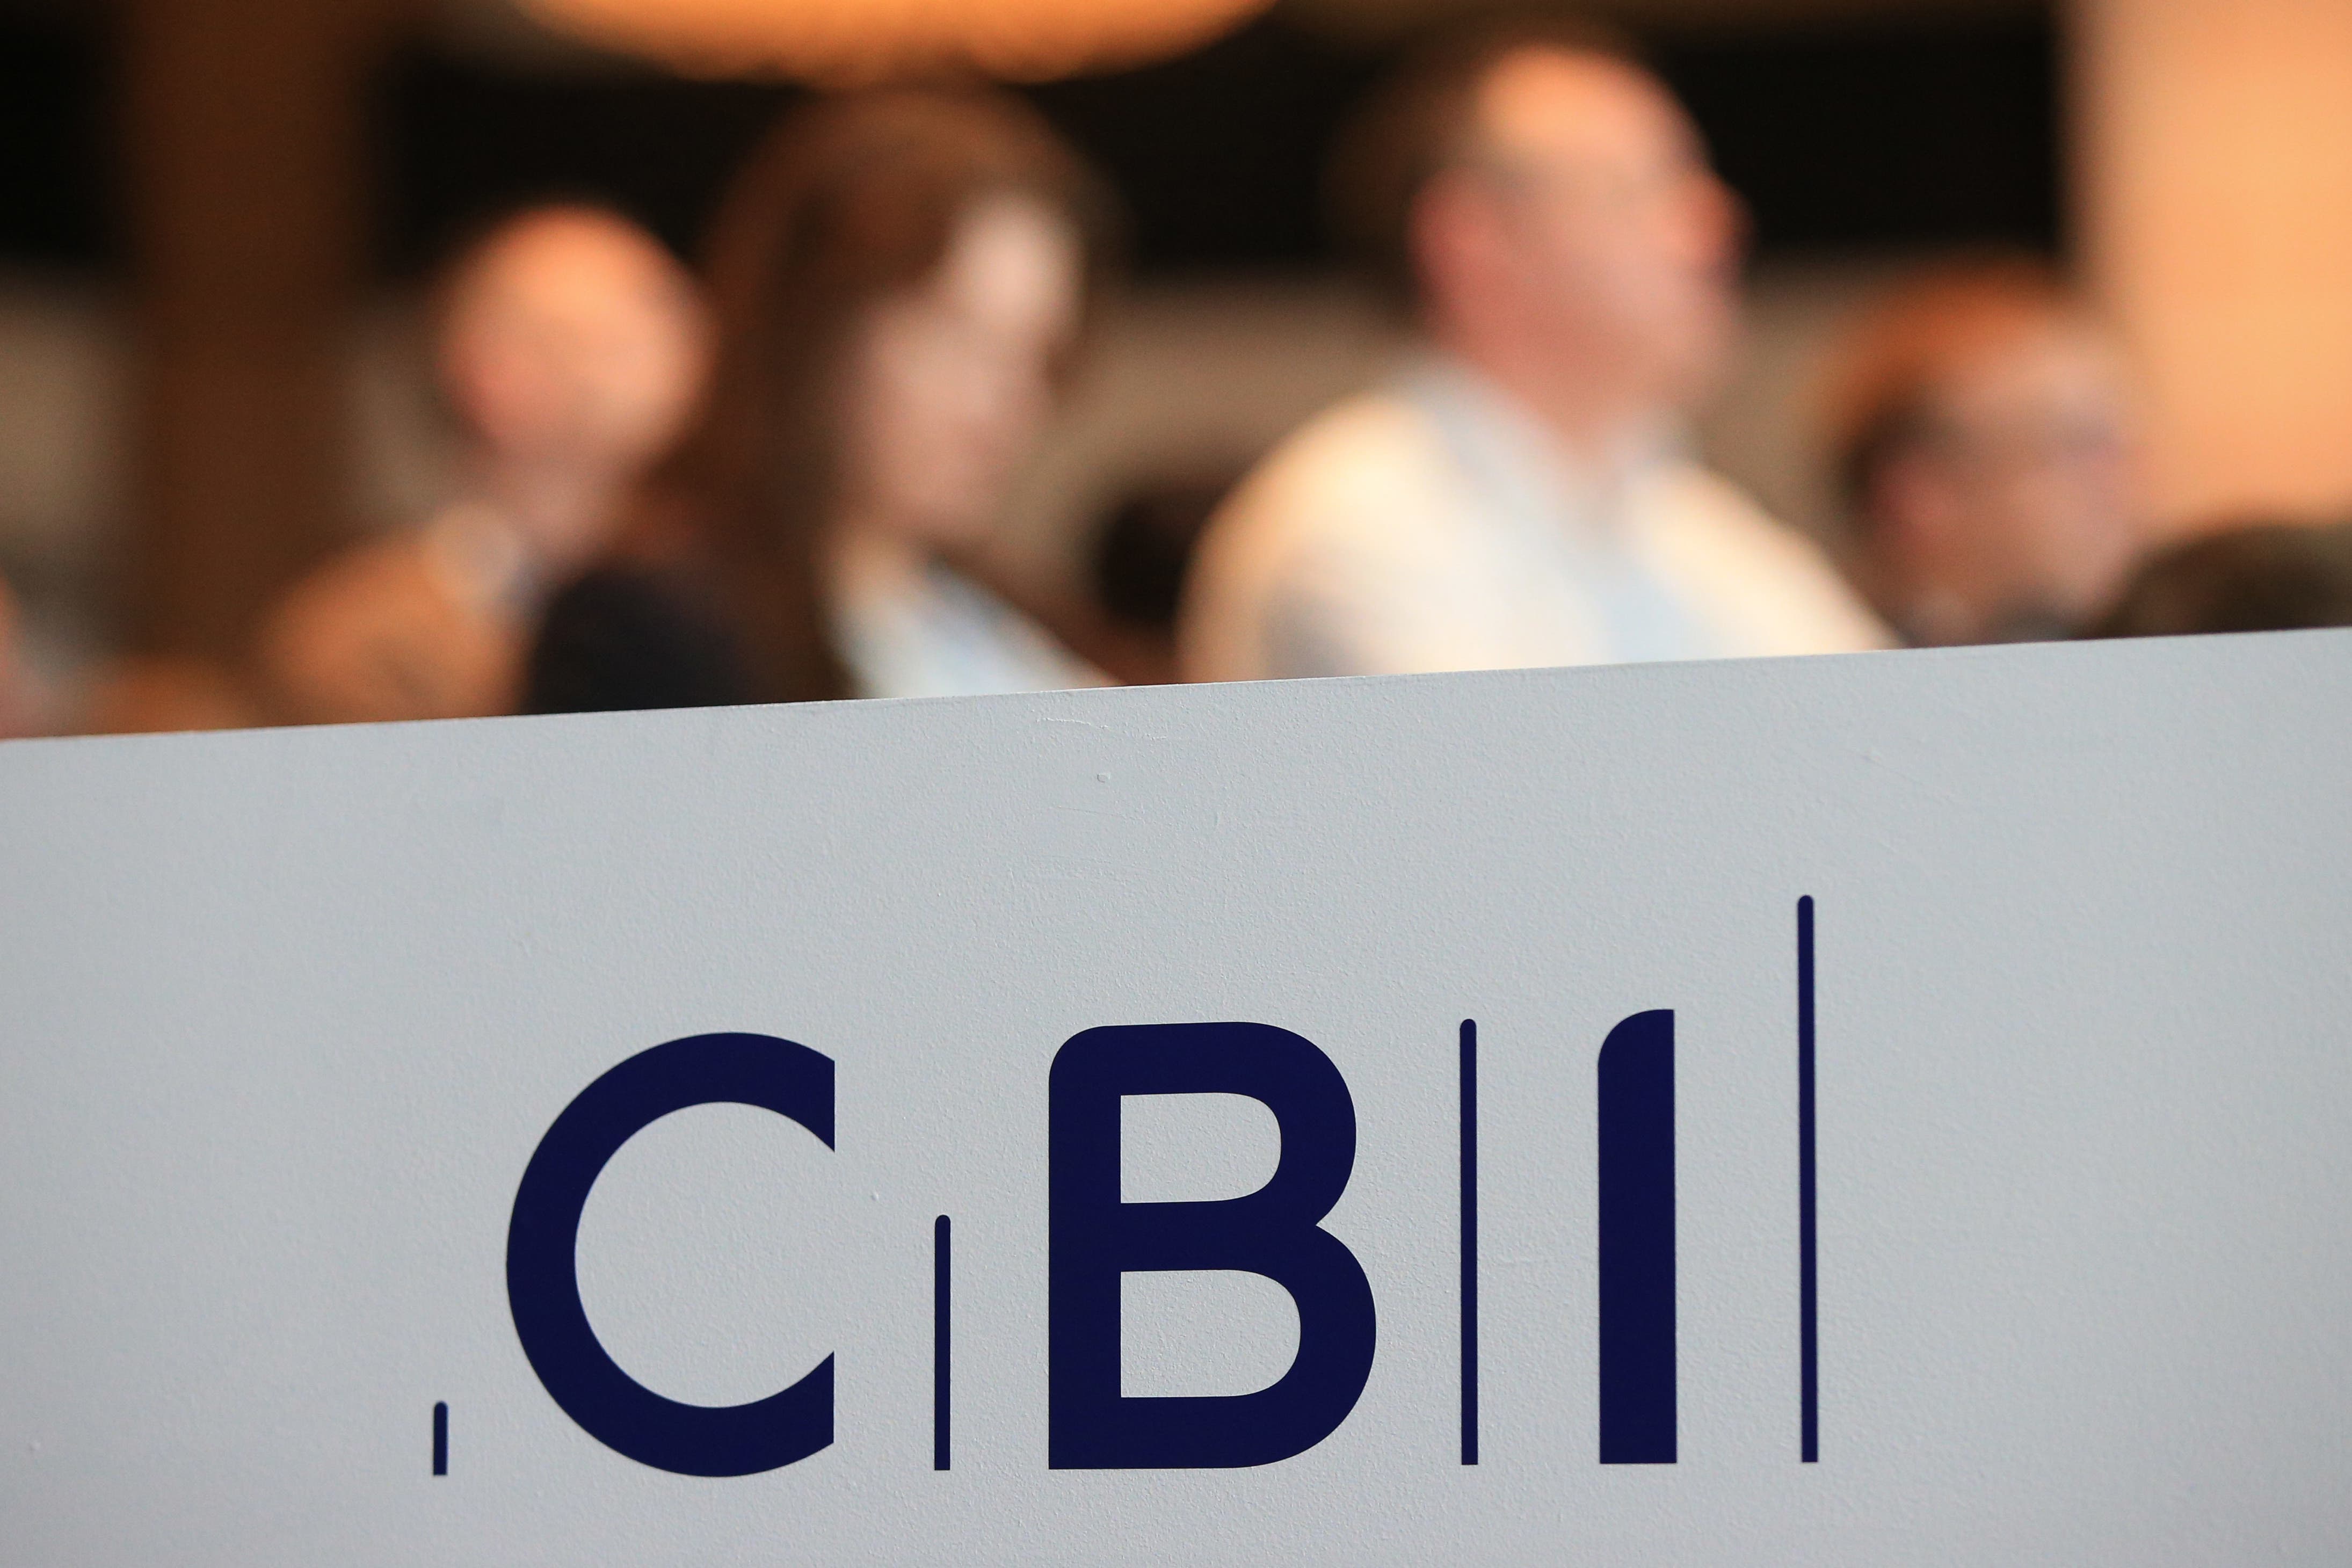 The durability of the CBI over the past few decades seemed to attest to its success